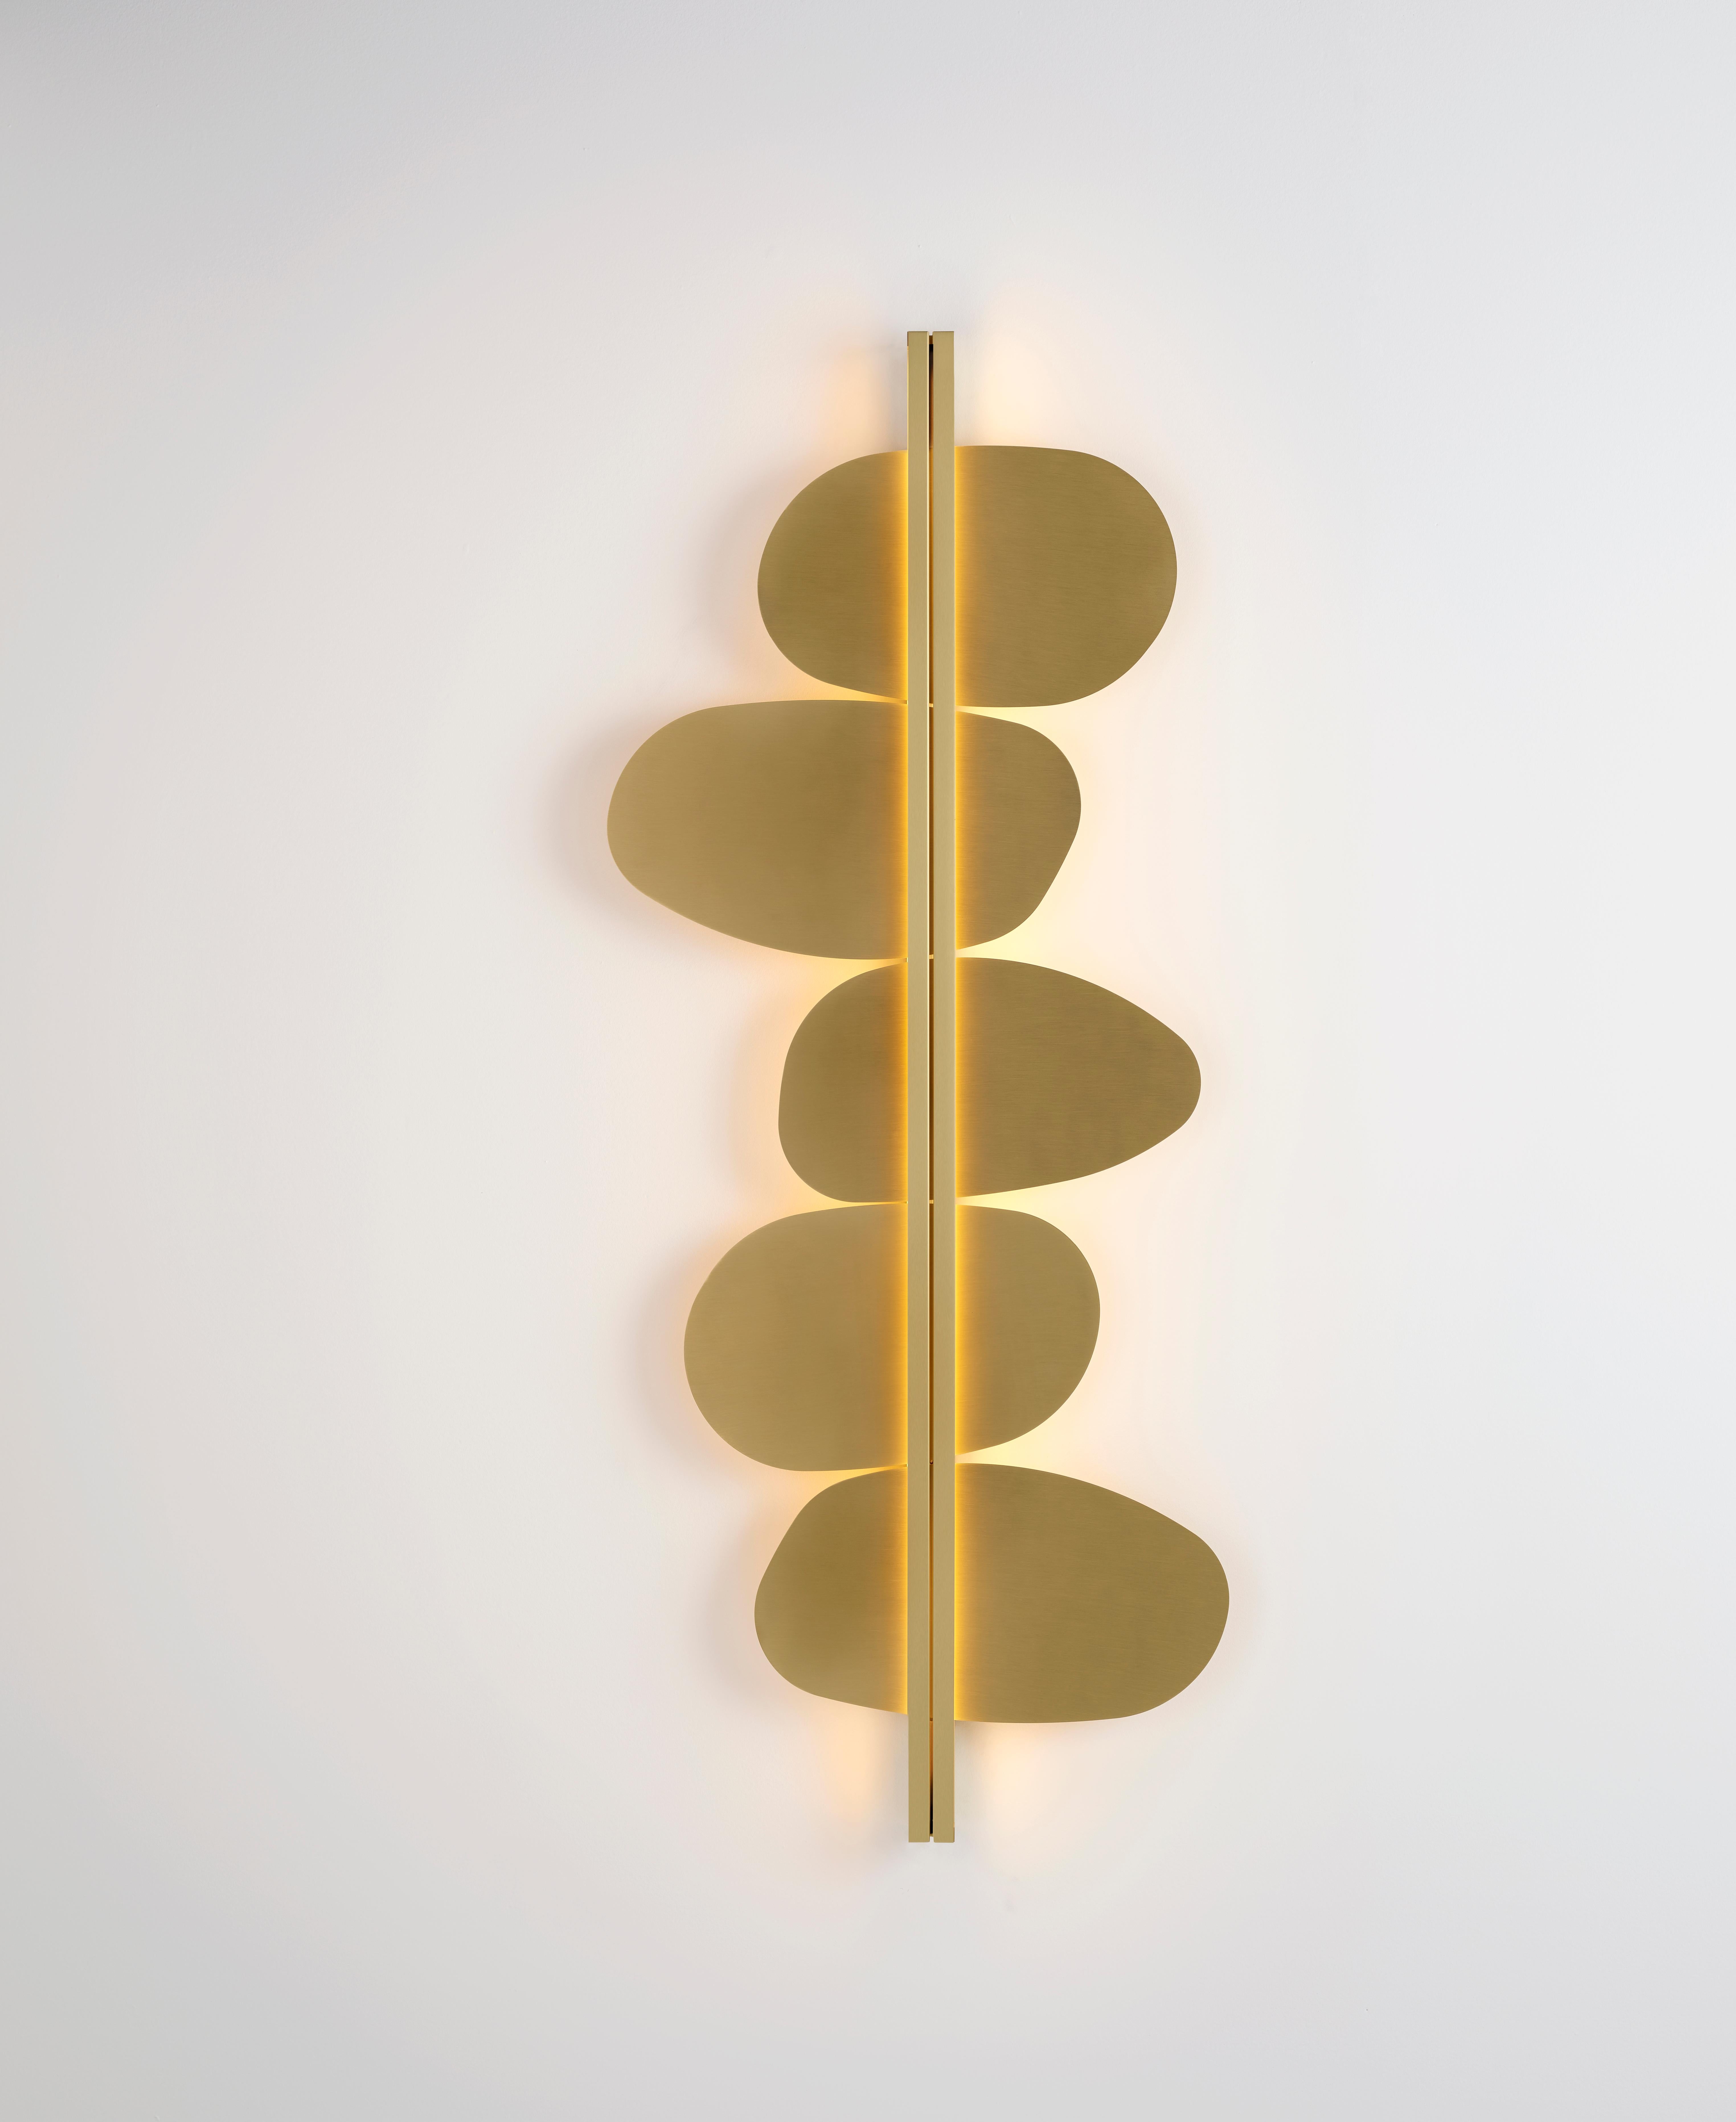 Strate stone wall light by Emilie Cathelineau
Dimensions: W 62.2 x D 8.7 x H 150 cm
Materials: solid brass, Polycarbonate diffuser.
Others finishes and dimensions are available.

All our lamps can be wired according to each country. If sold to